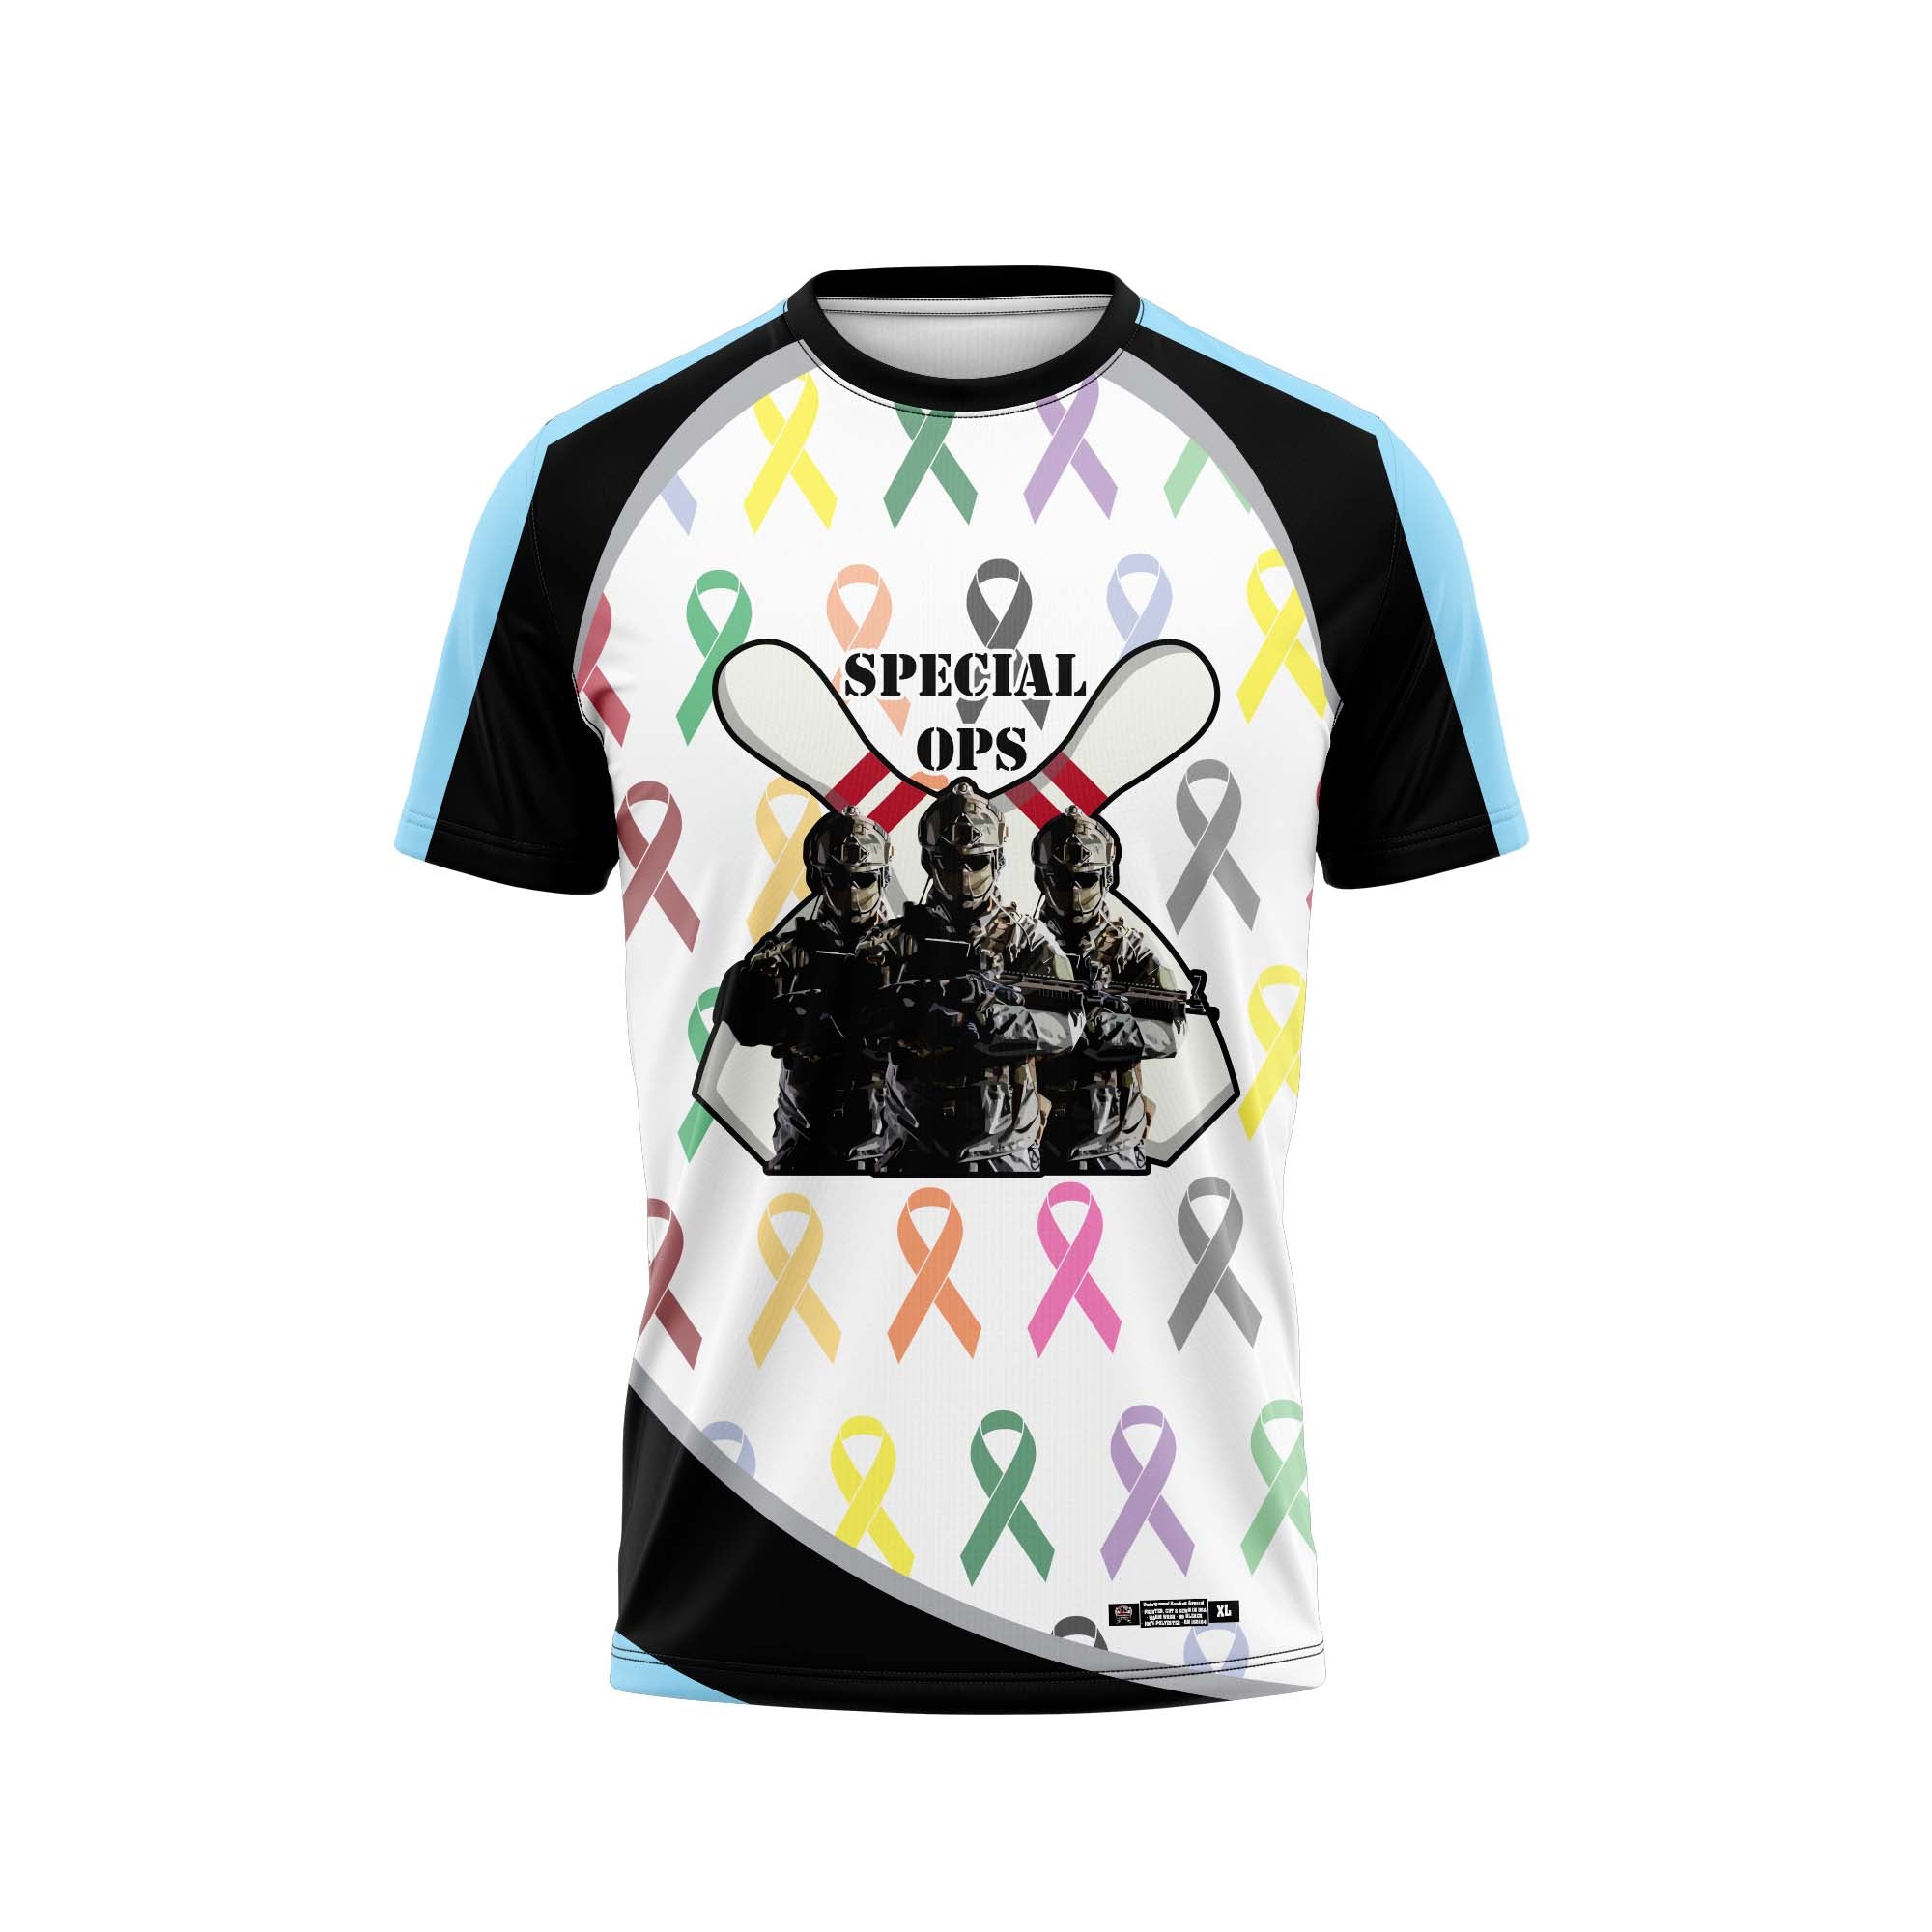 Special Ops Cancer Awareness Jersey